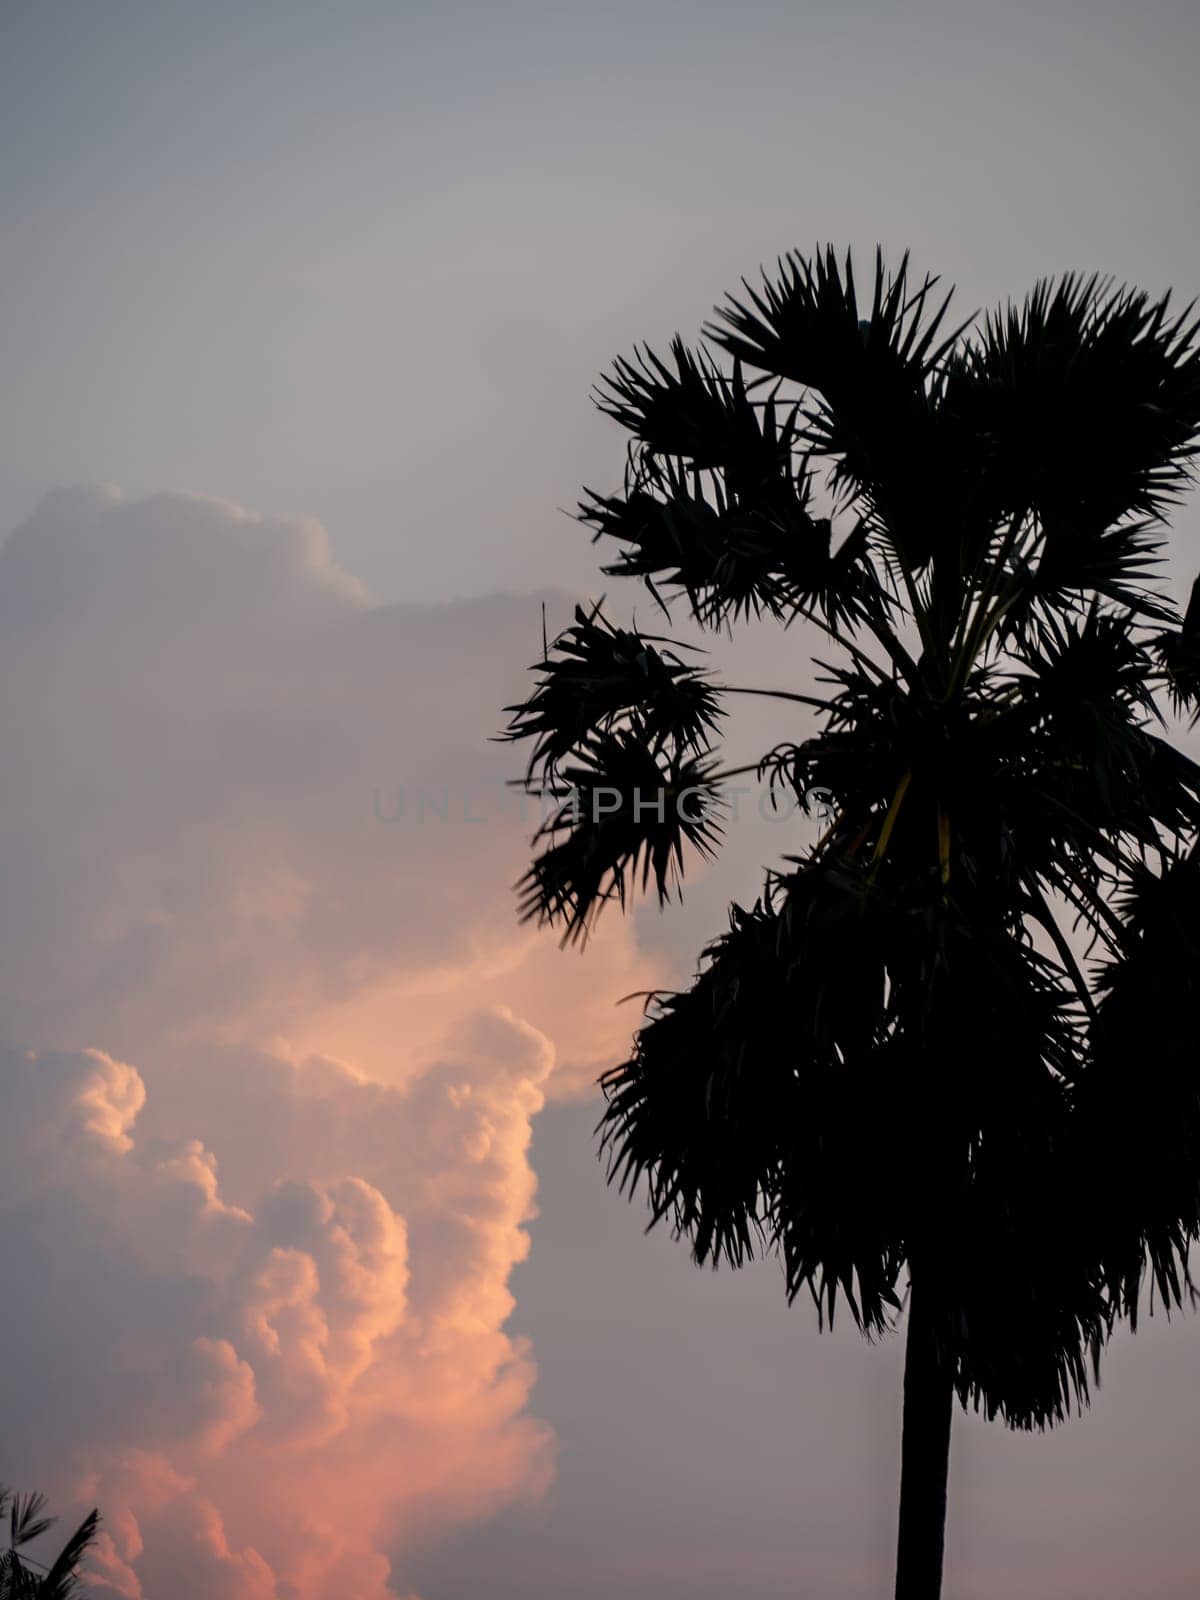 Silhouette of Sugar palm tree with magenta sky and clouds at dusk by Satakorn